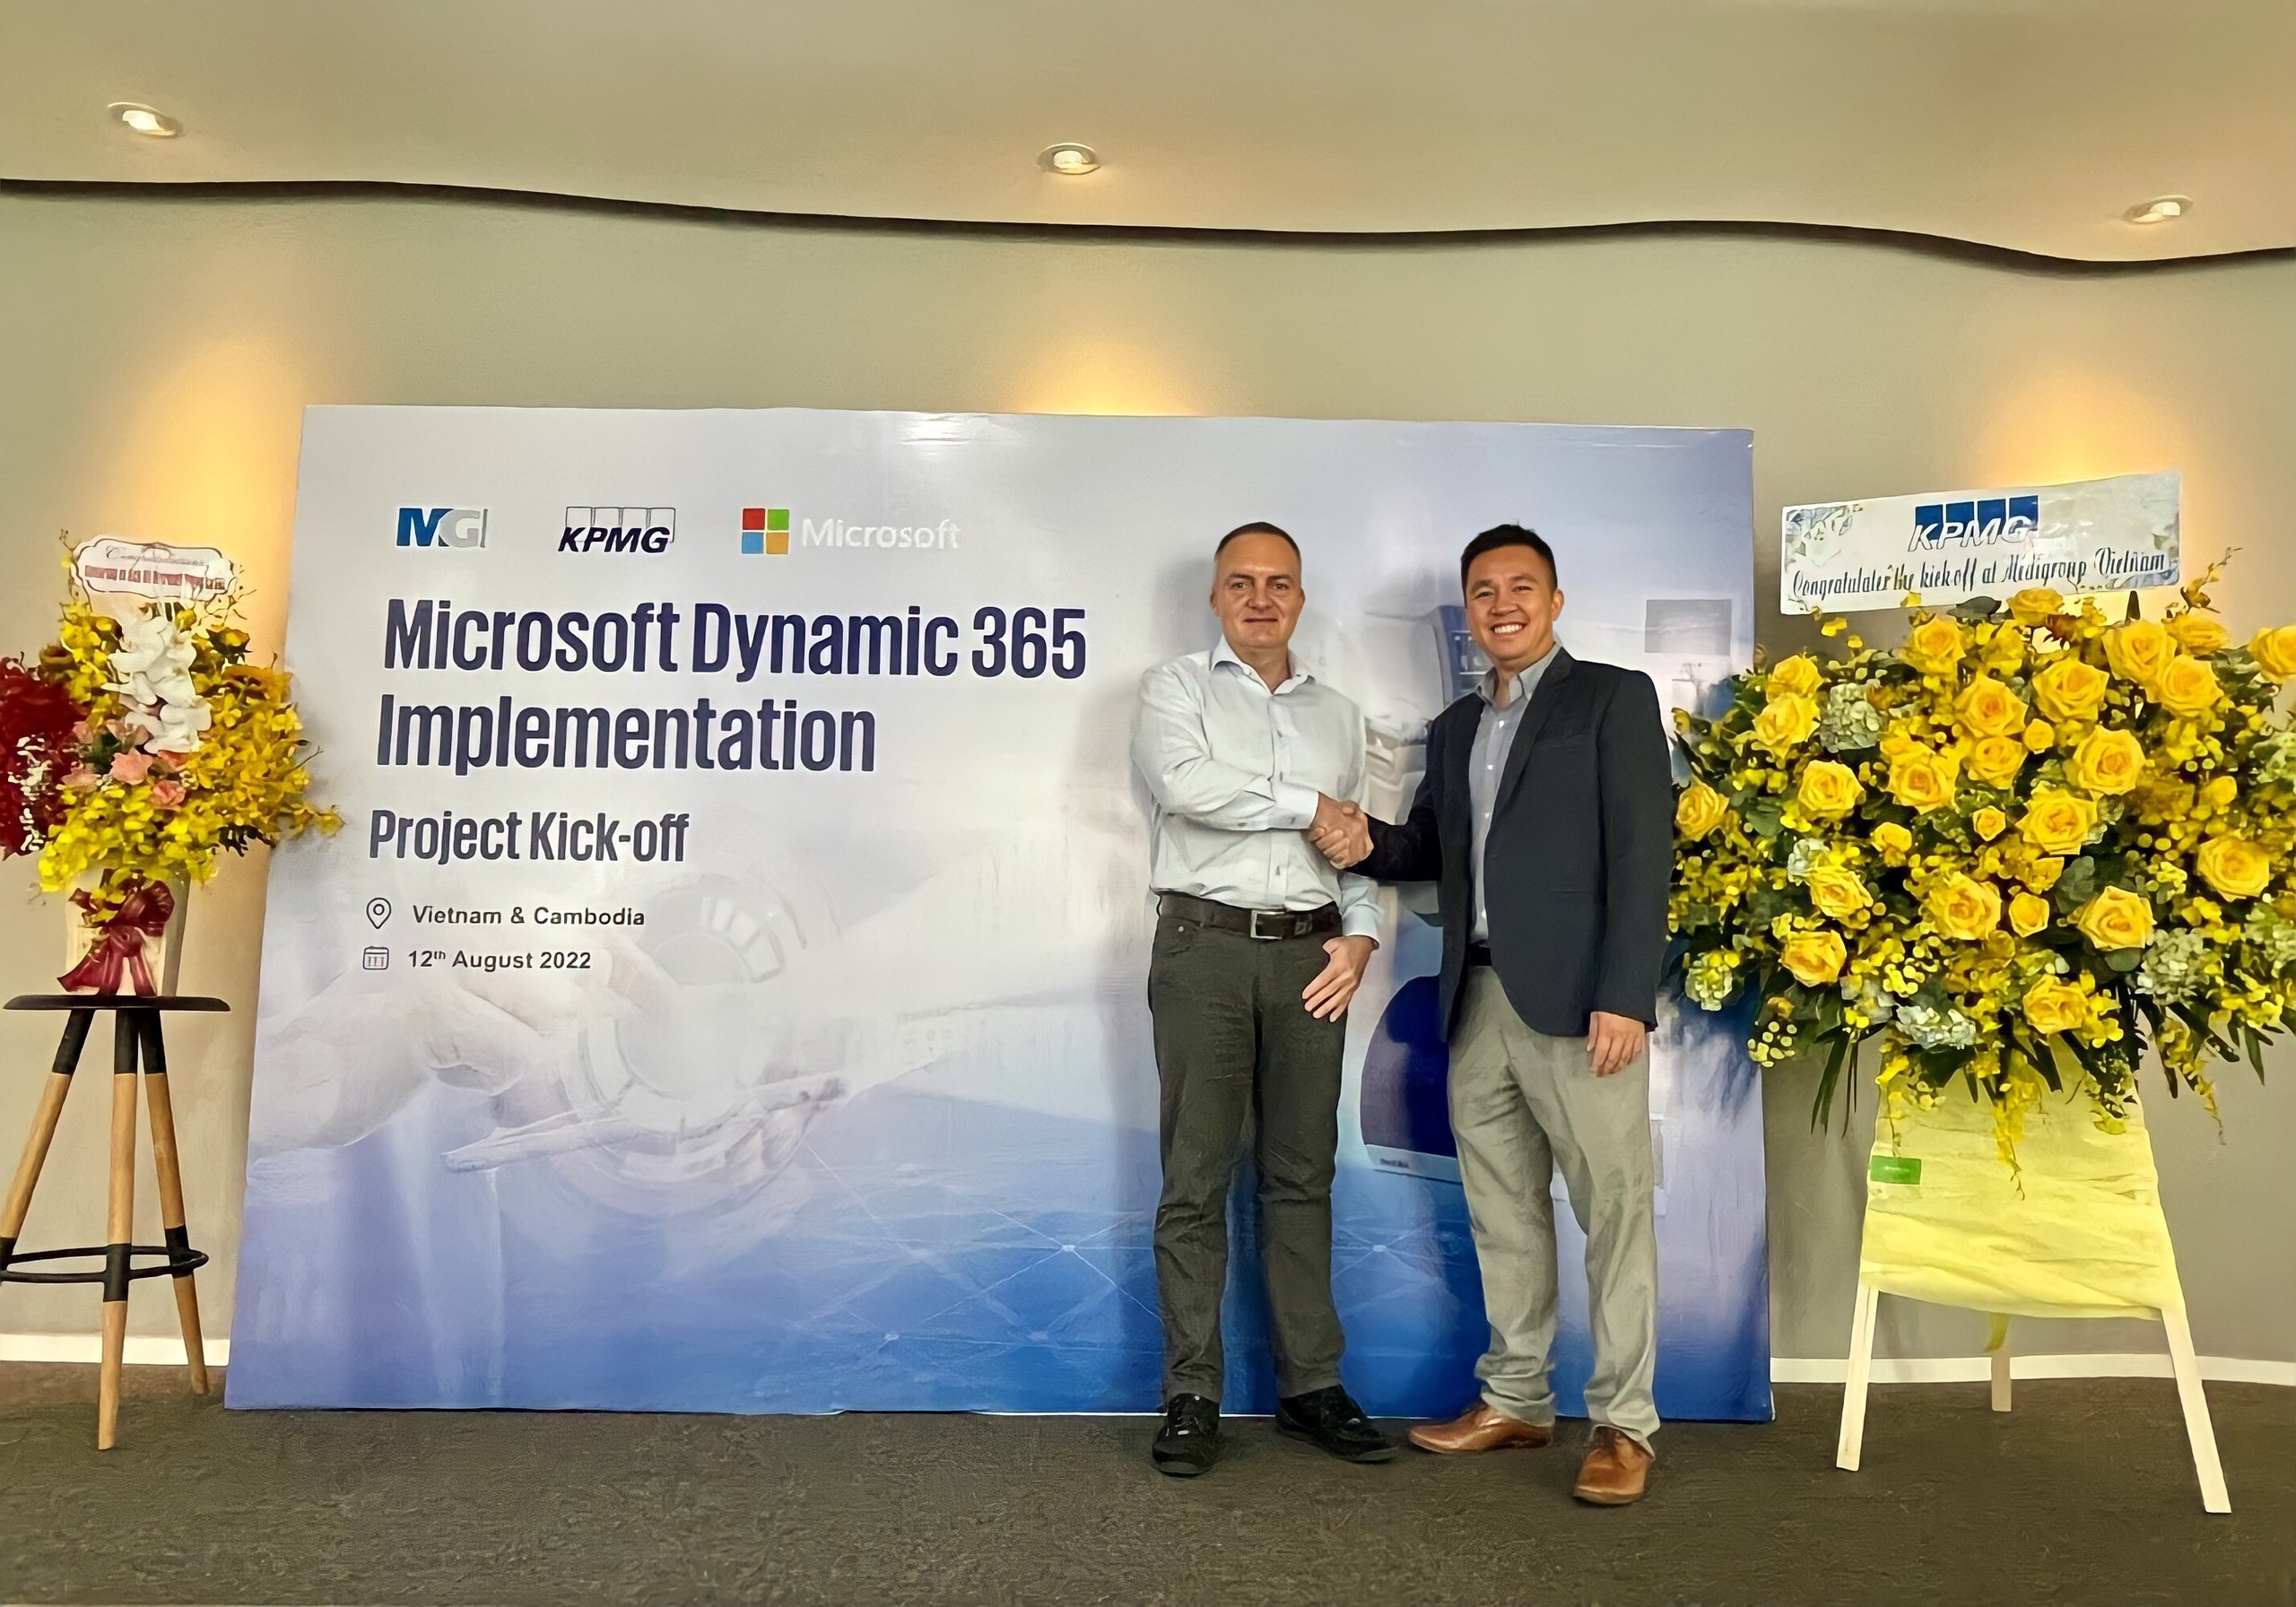 MEDIGROUP-KPMG-in-Vietnam-officially-launched-the-Microsoft-Dynamics-365-Finance-operations-project